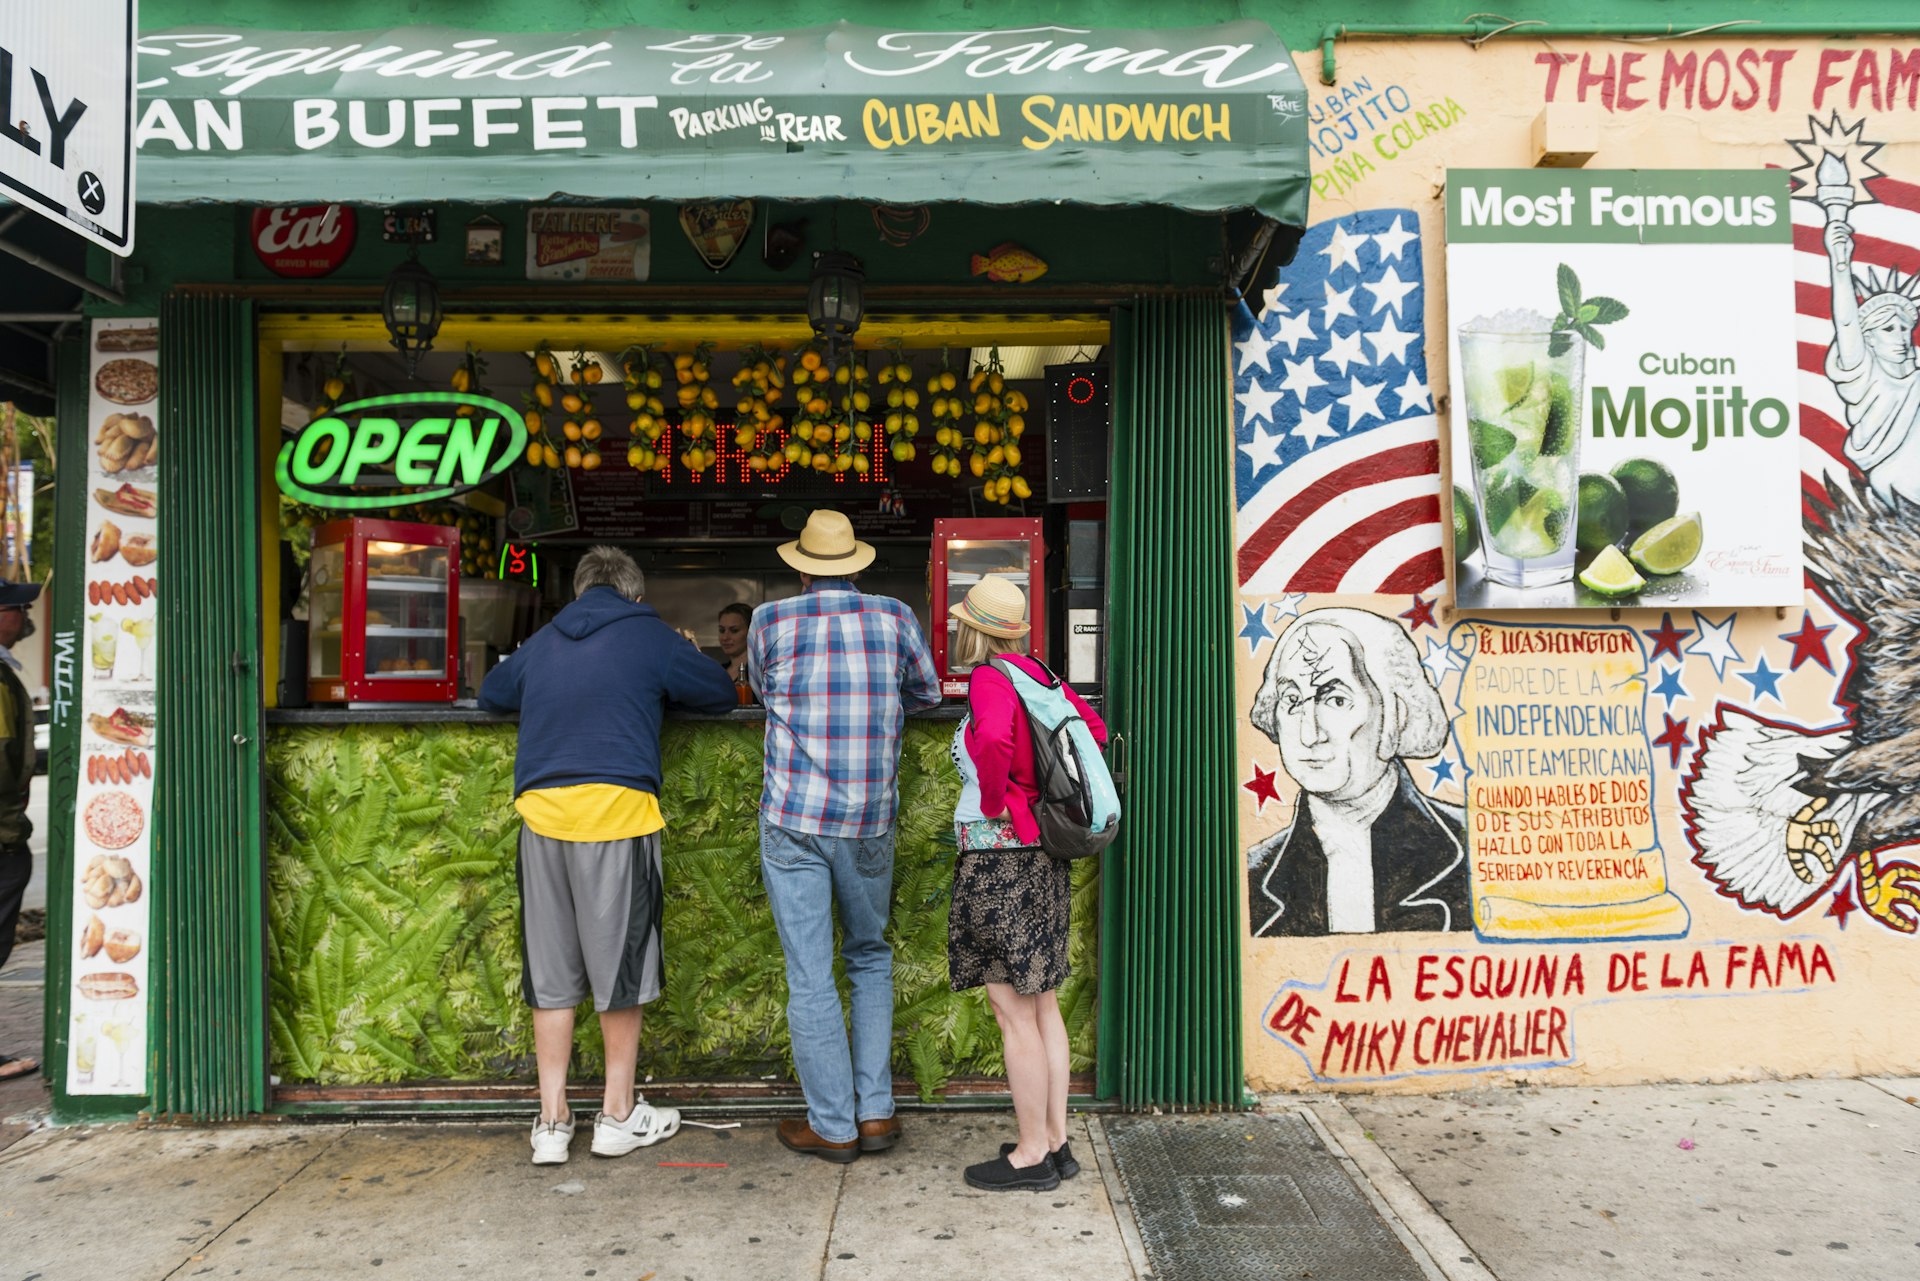 Tourists stand to order from the open air countertop of a restaurant advertising Cuban food and drinks on historic Calle Ocho in Little Havana.